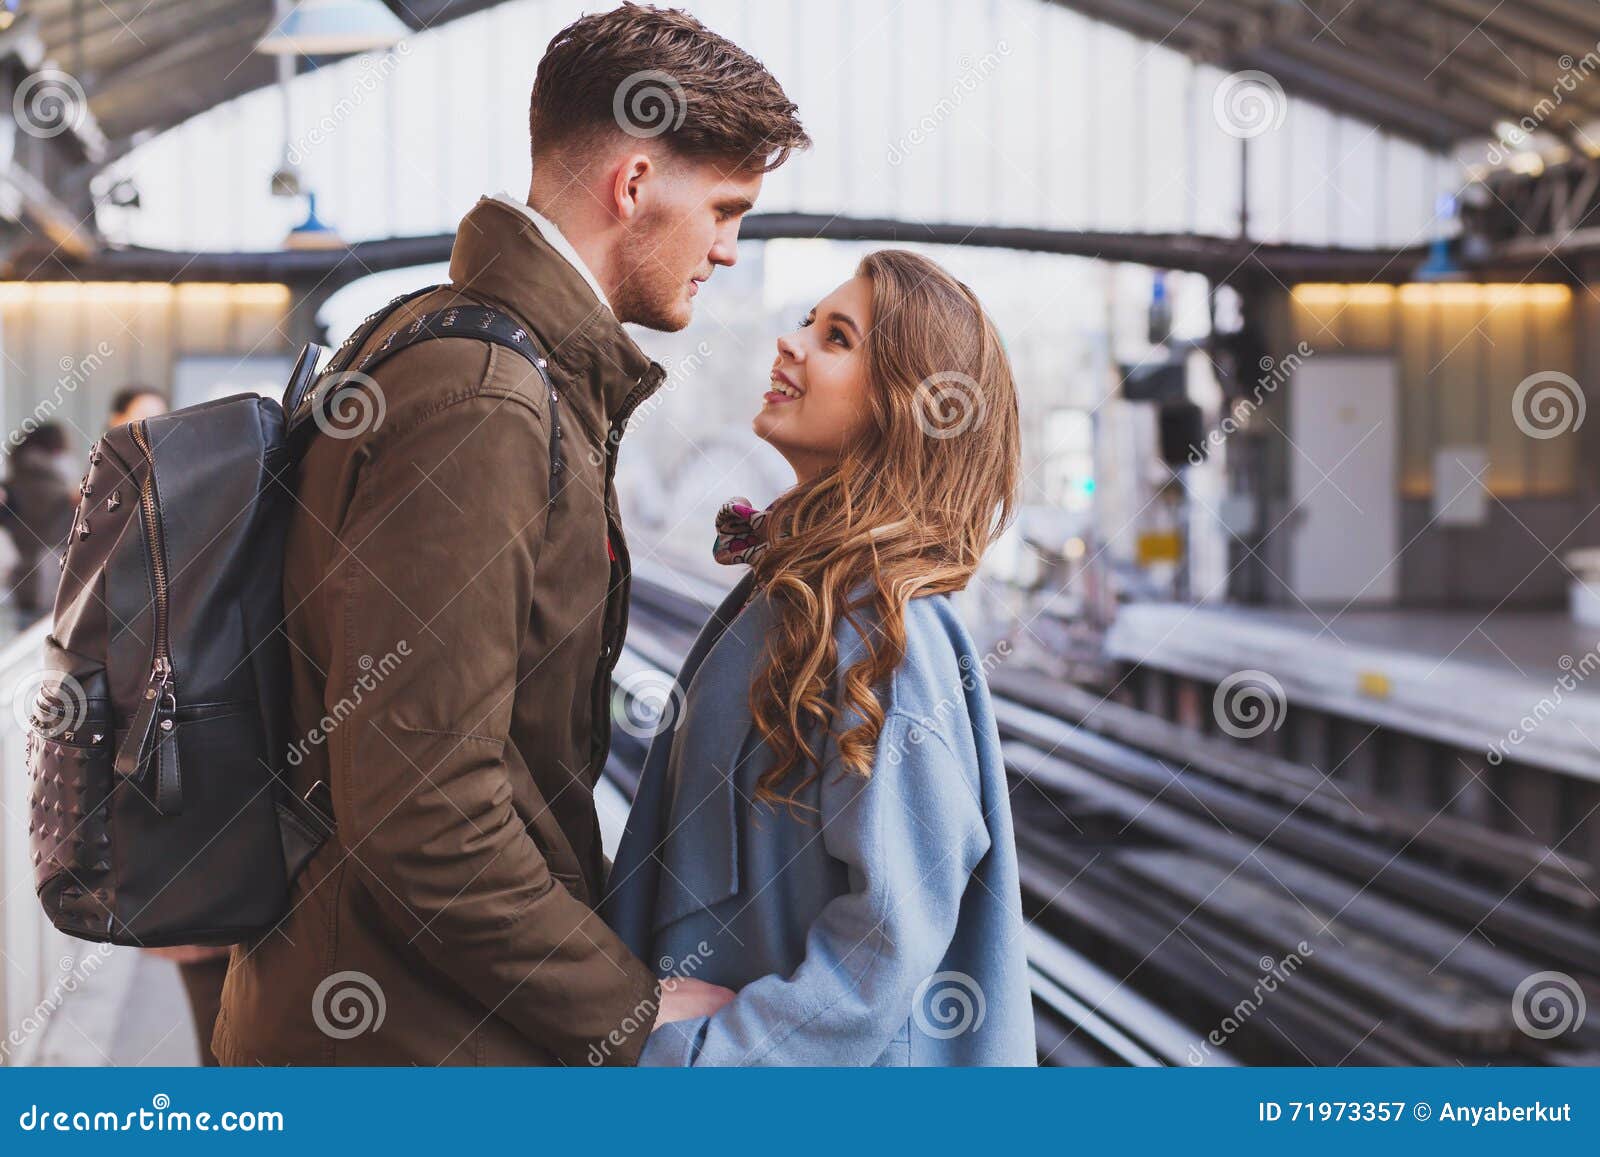 long distance relationship, couple at the train station